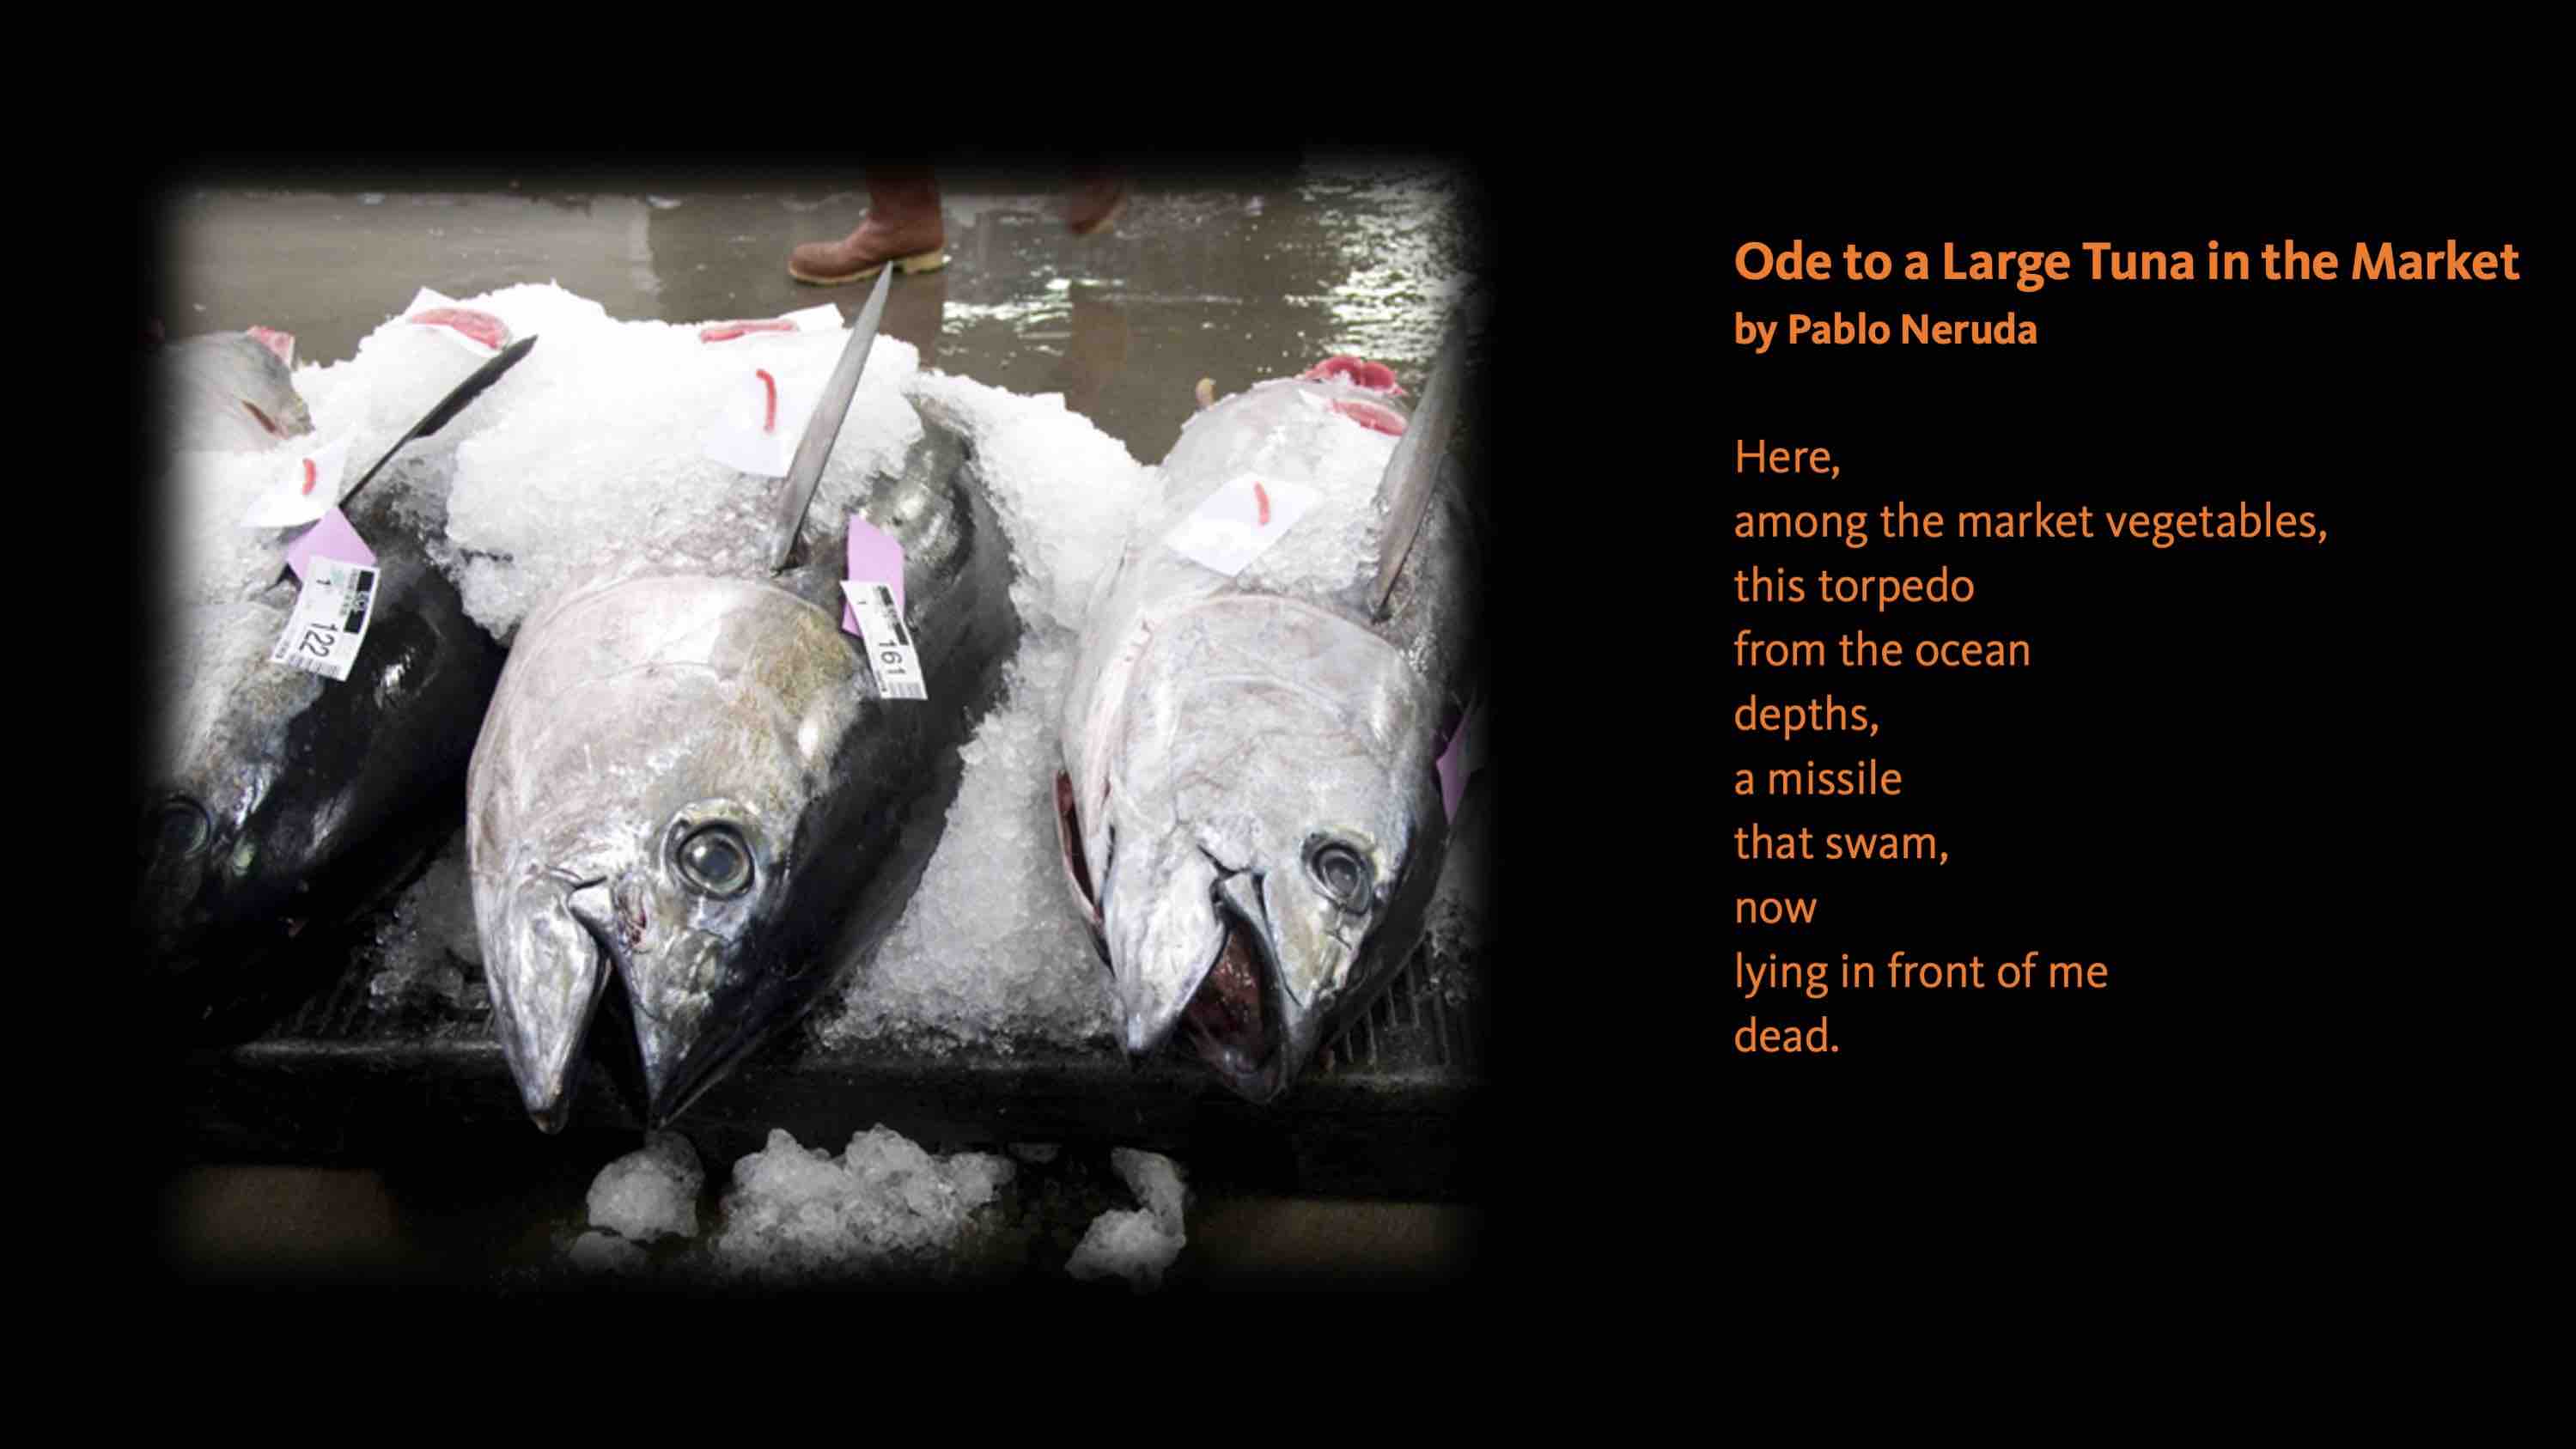 Neruda Ode to a Large Tuna in the Market